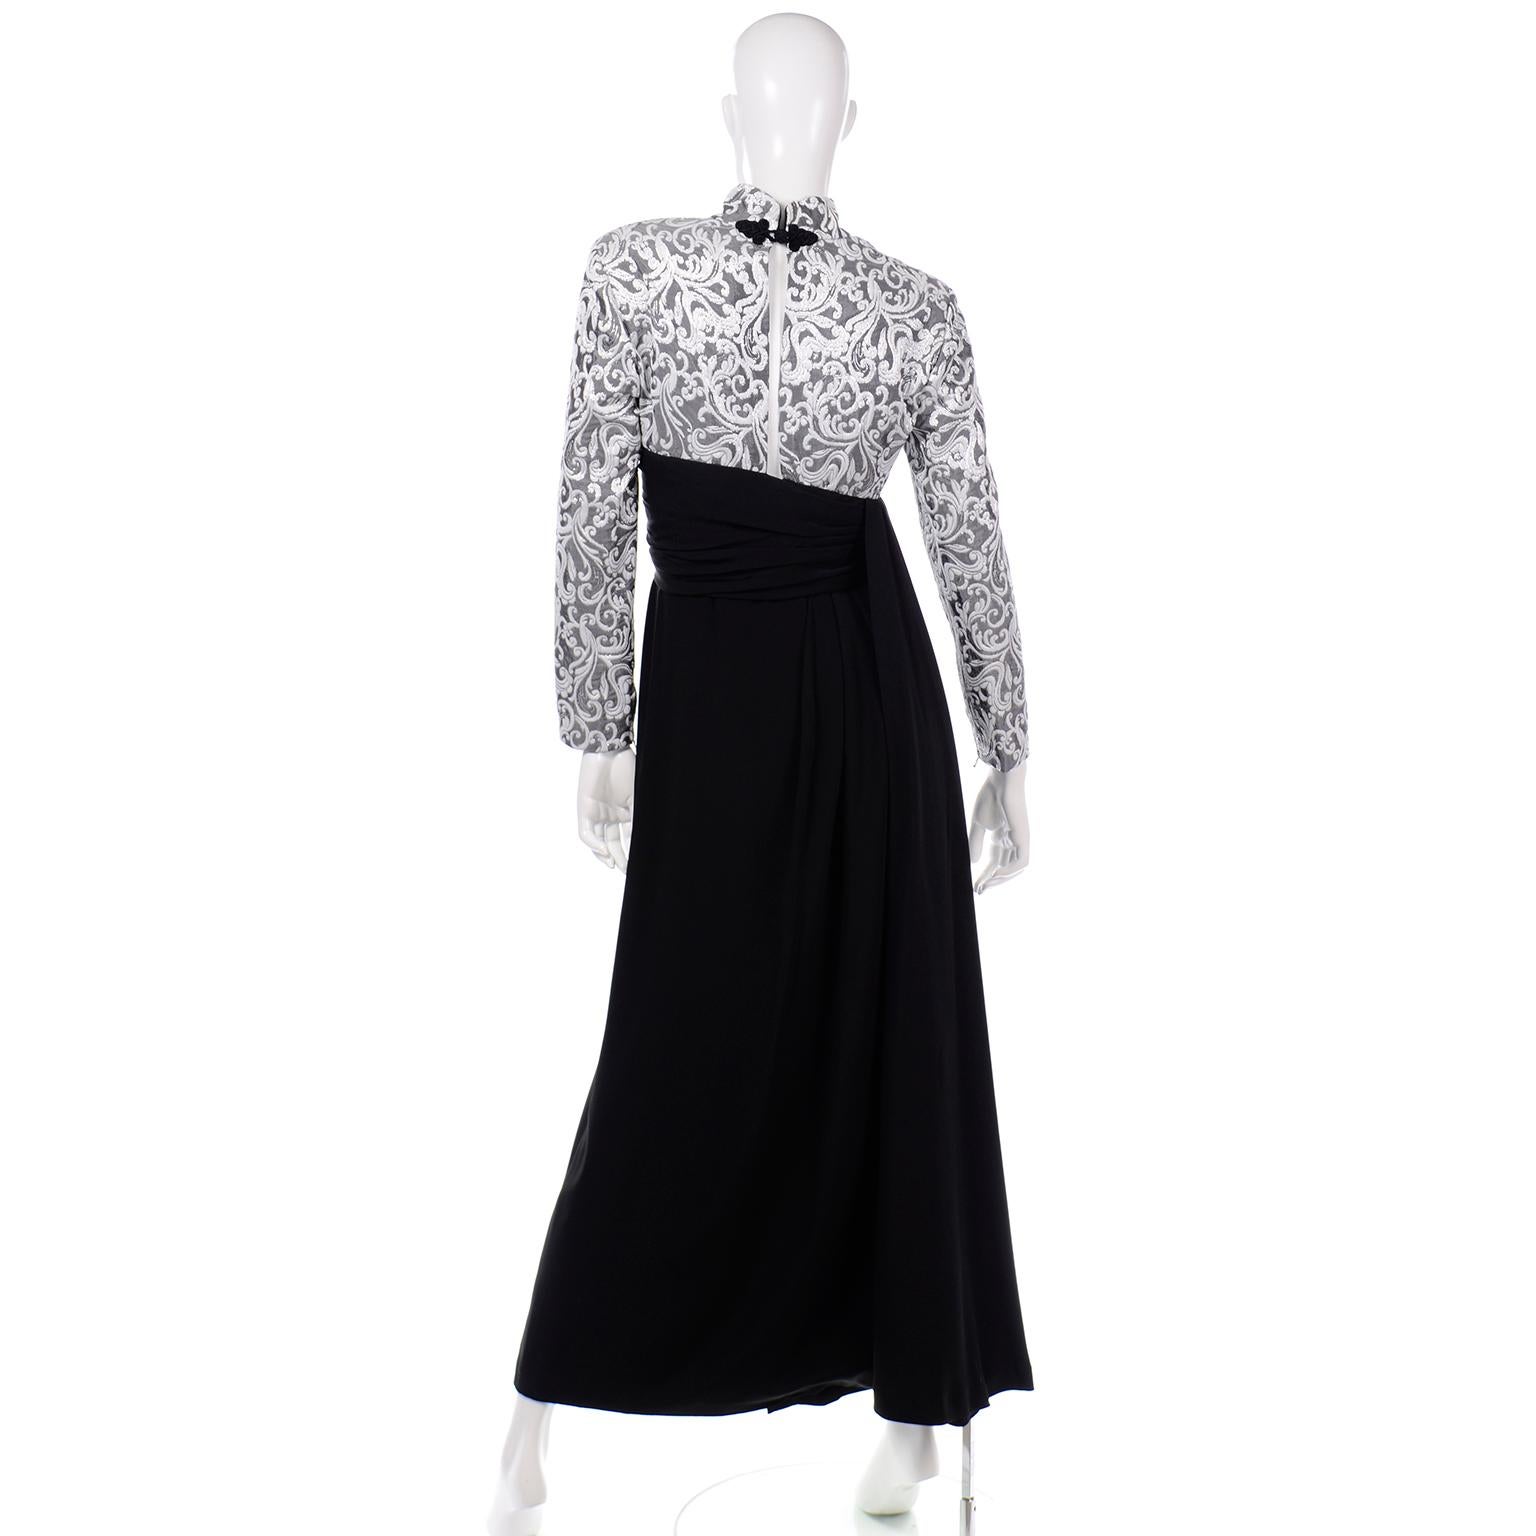 Women's or Men's Vintage Jacques Fath Black Evening Dress With Silver & White Brocade Lace Print For Sale